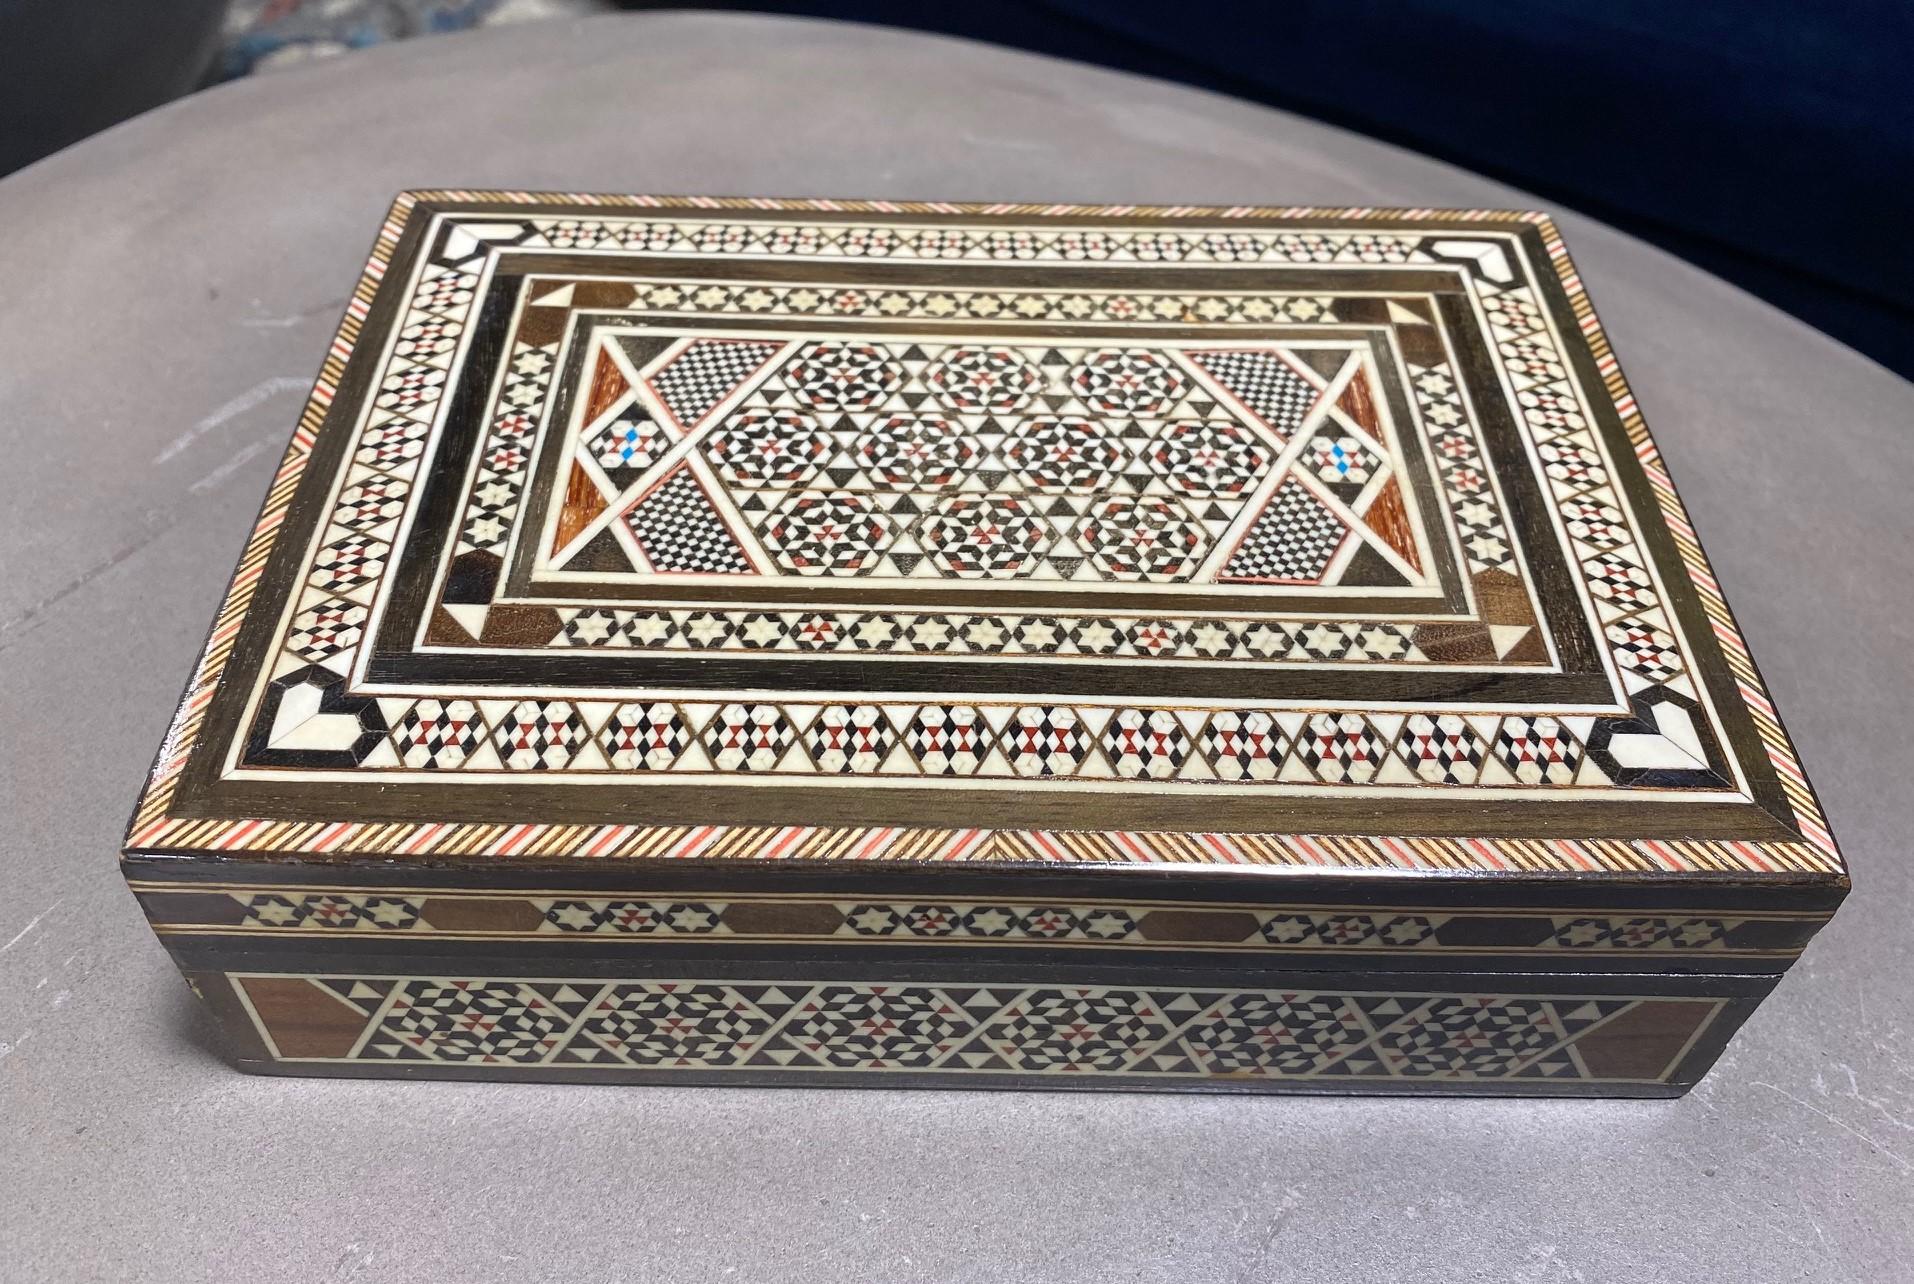 Stunning mosaic design, this intricate wood box is made from multiple micro pieces of wood with some possible bone inlays. Gorgeous craftsmanship. A true work of art. 

Would be a great addition to any decorative art box or jewelry box collection